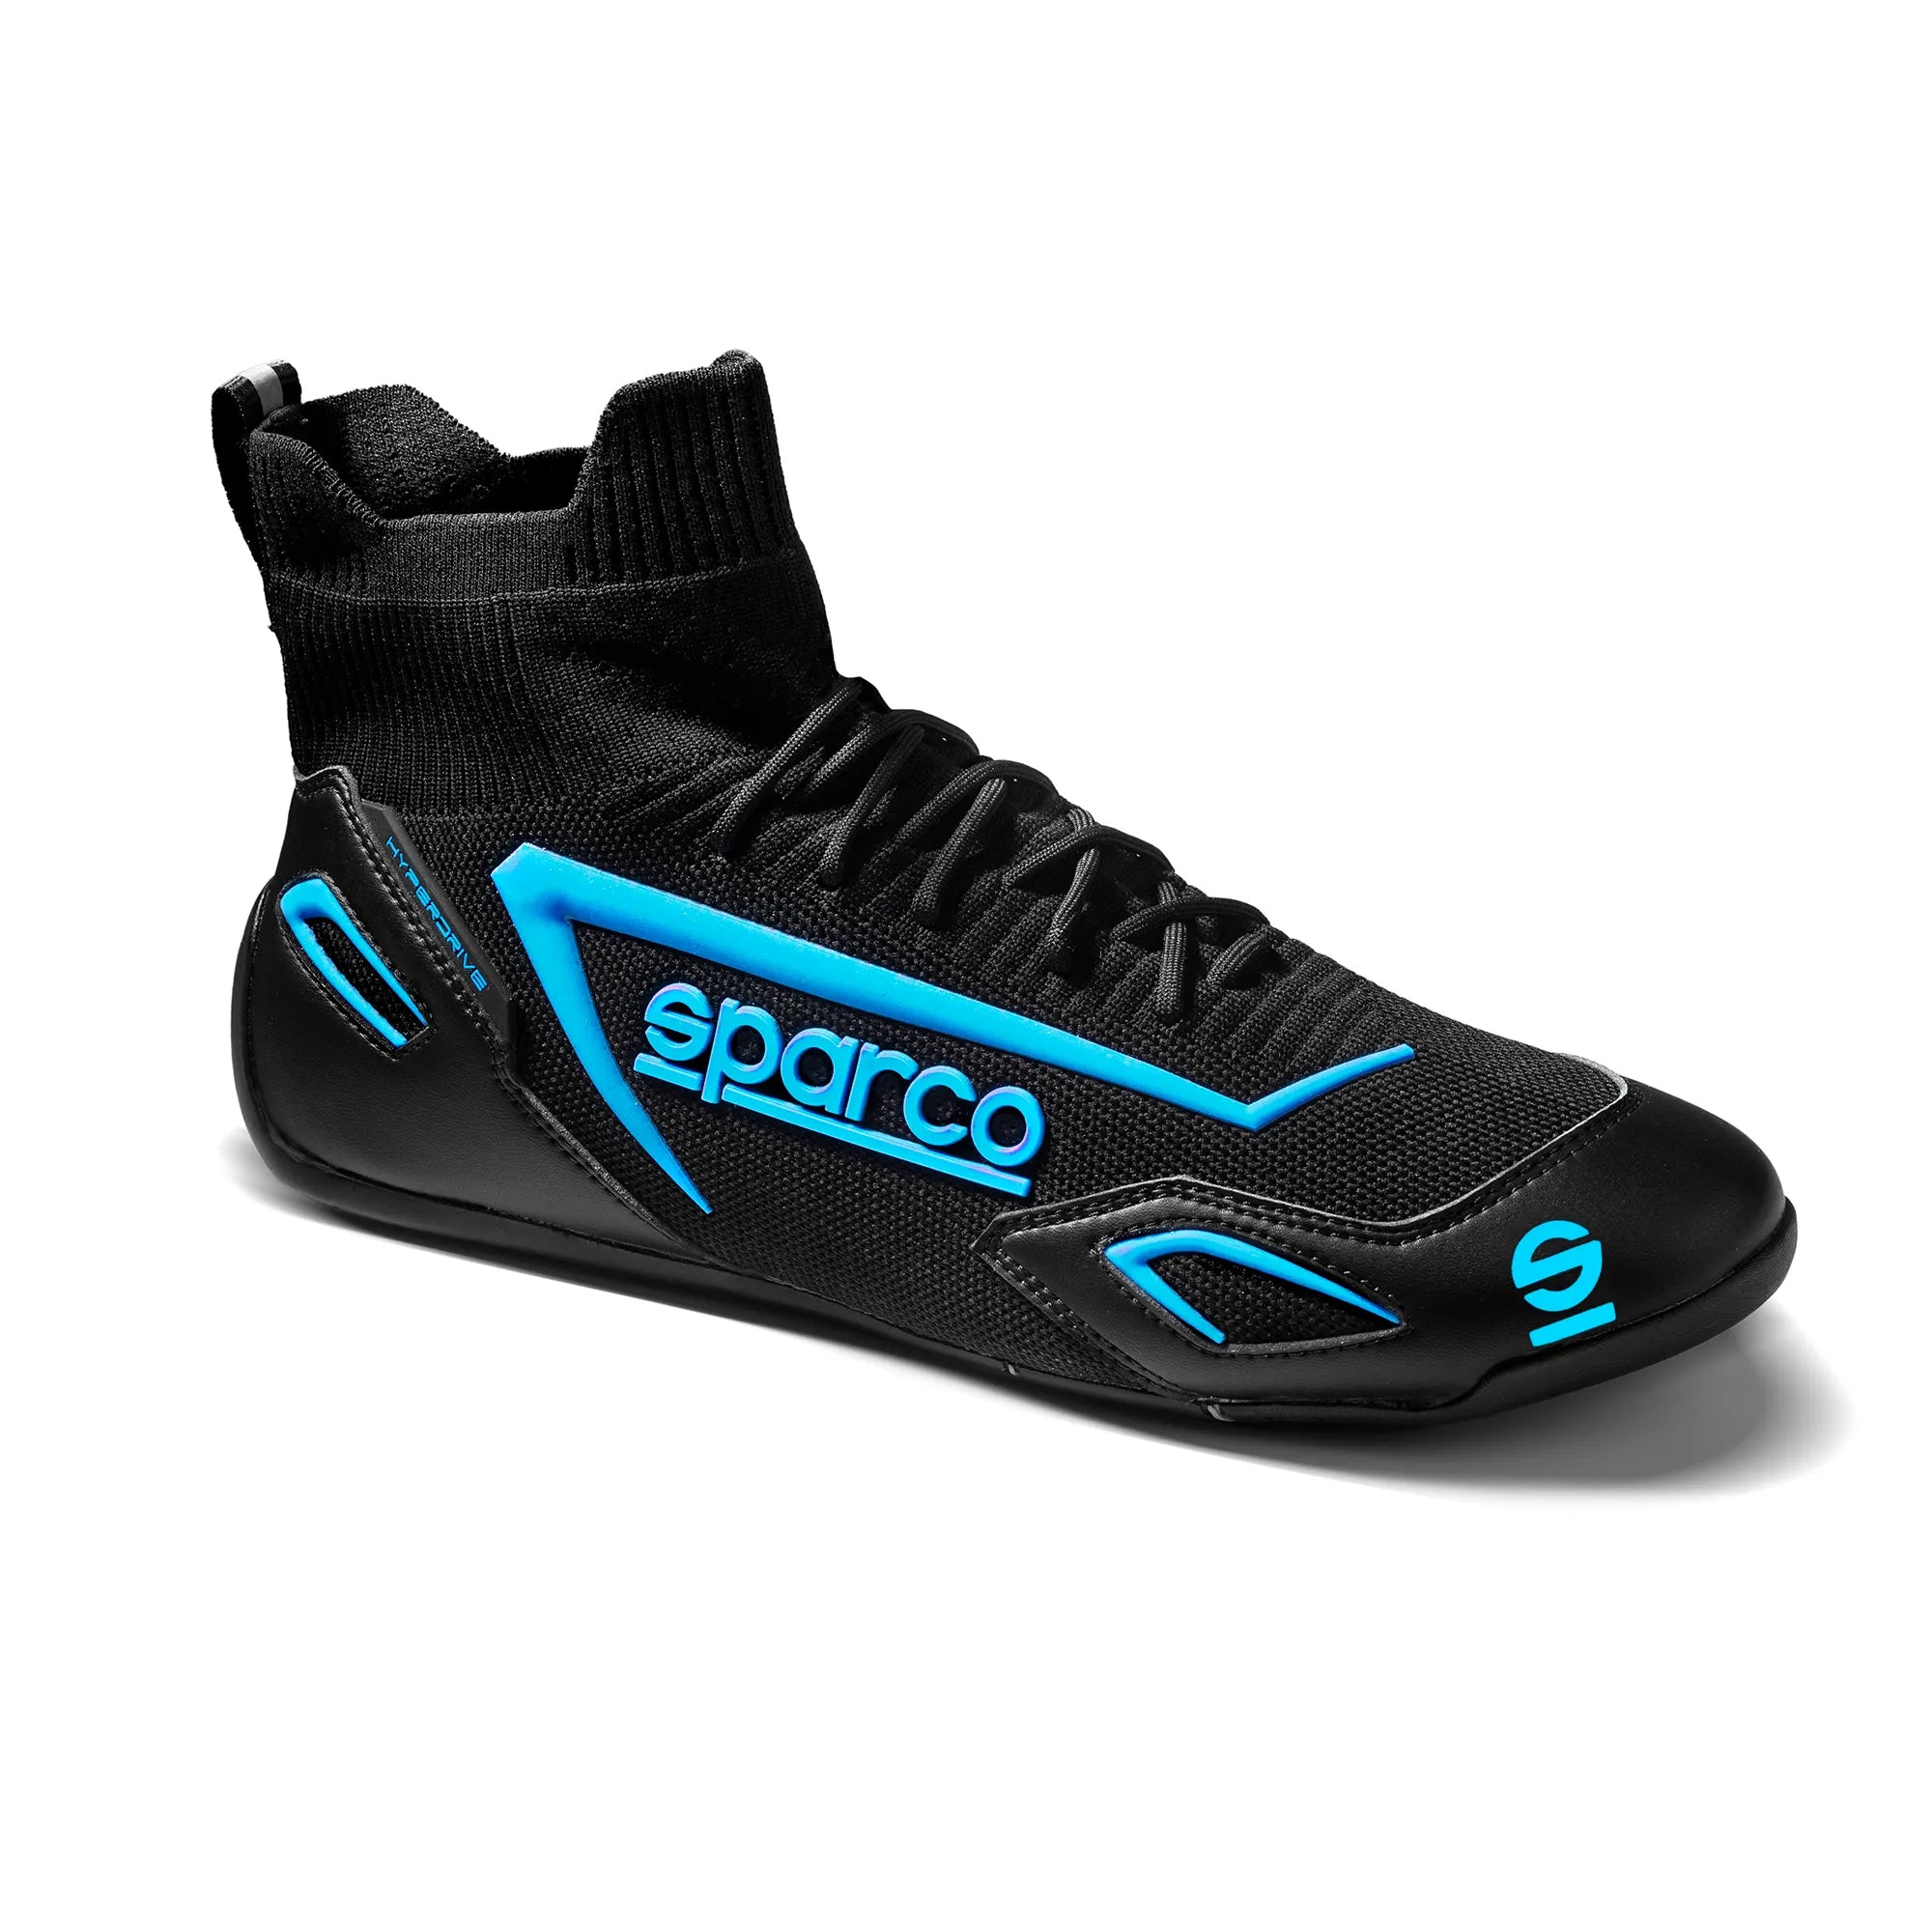 SPARCO 00129345NRAZ Gaming sim racing shoes HYPERDRIVE, black/blue, size 45 Photo-1 